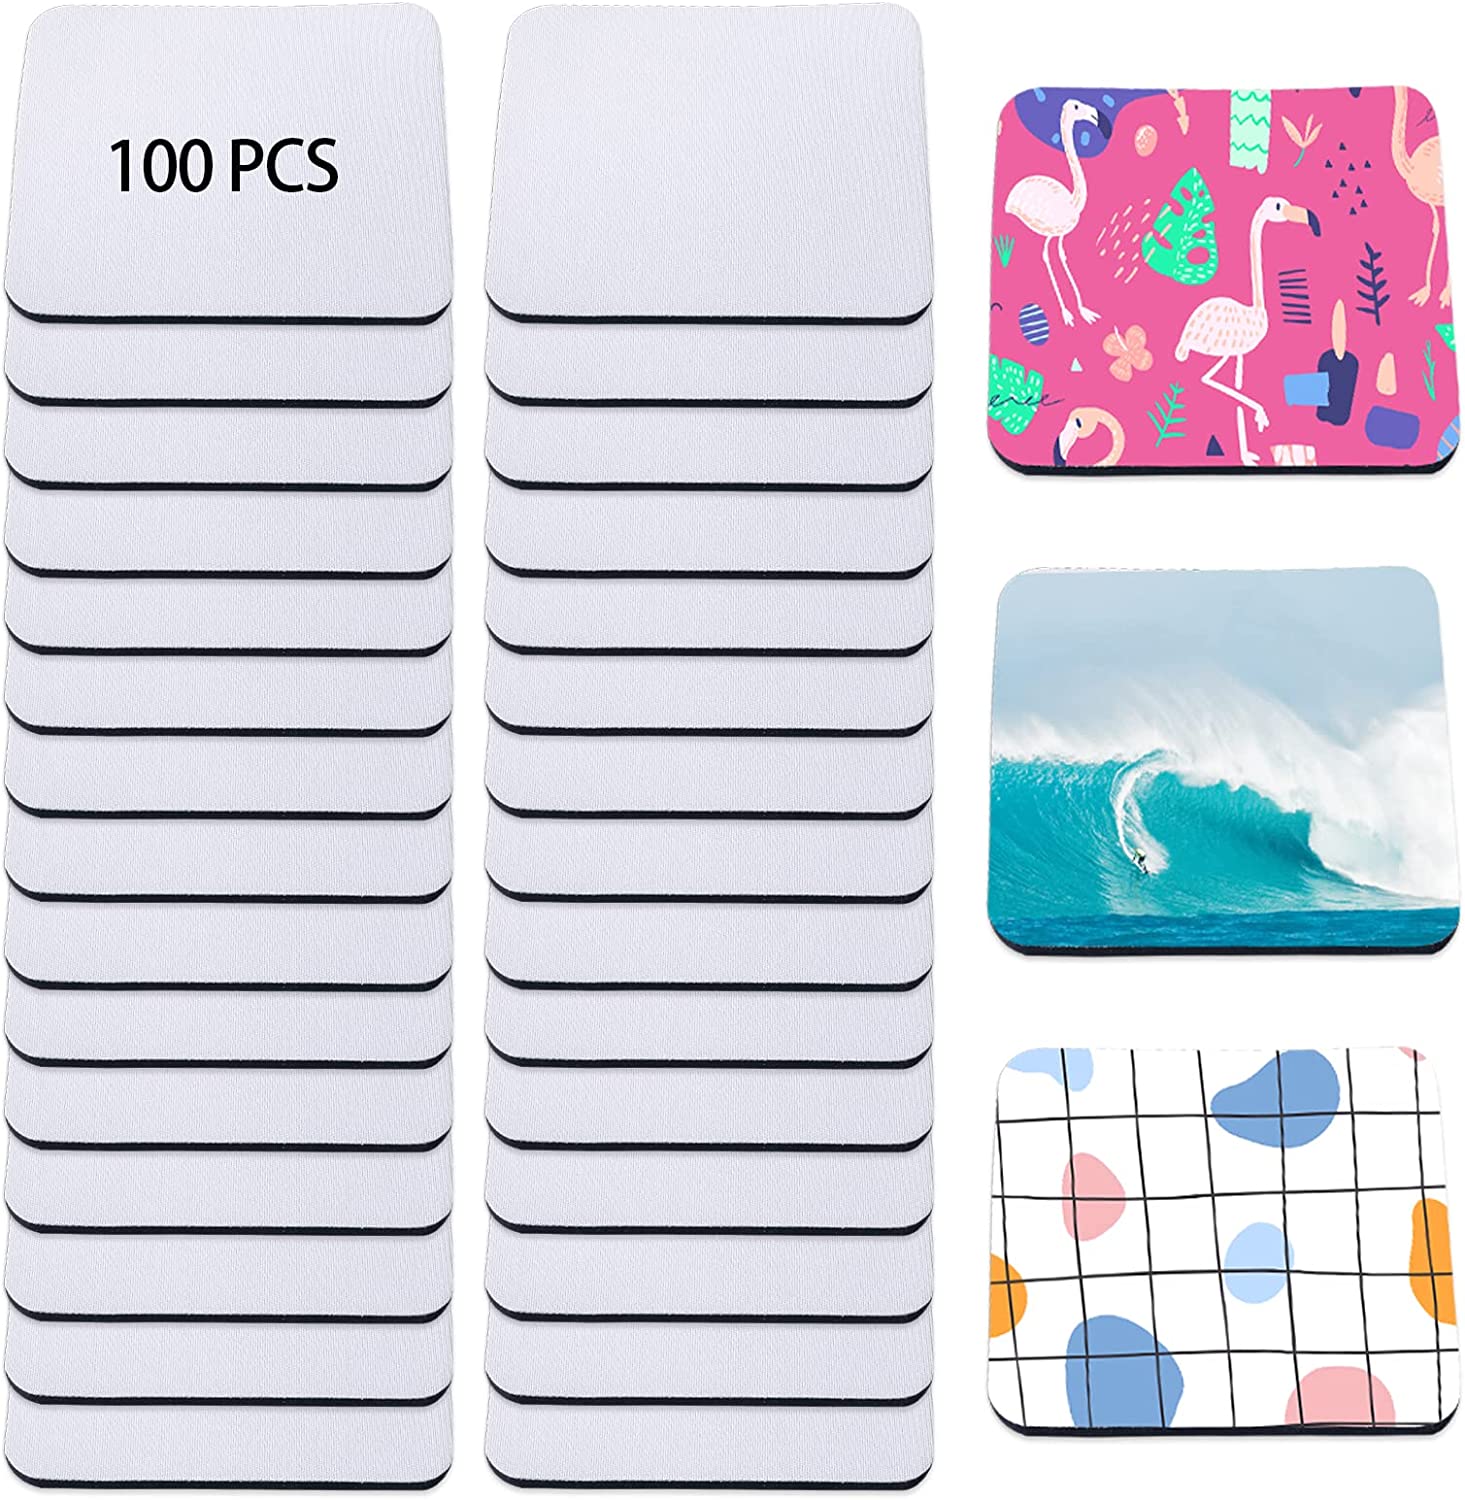 10PCS Sublimation Slate Blanks, 7.9 x 5.9 Inch Sublimation Blank Rock  Slates for Thermal Heat Press Transfer Photos, Rectangular Custom Picture  Stone